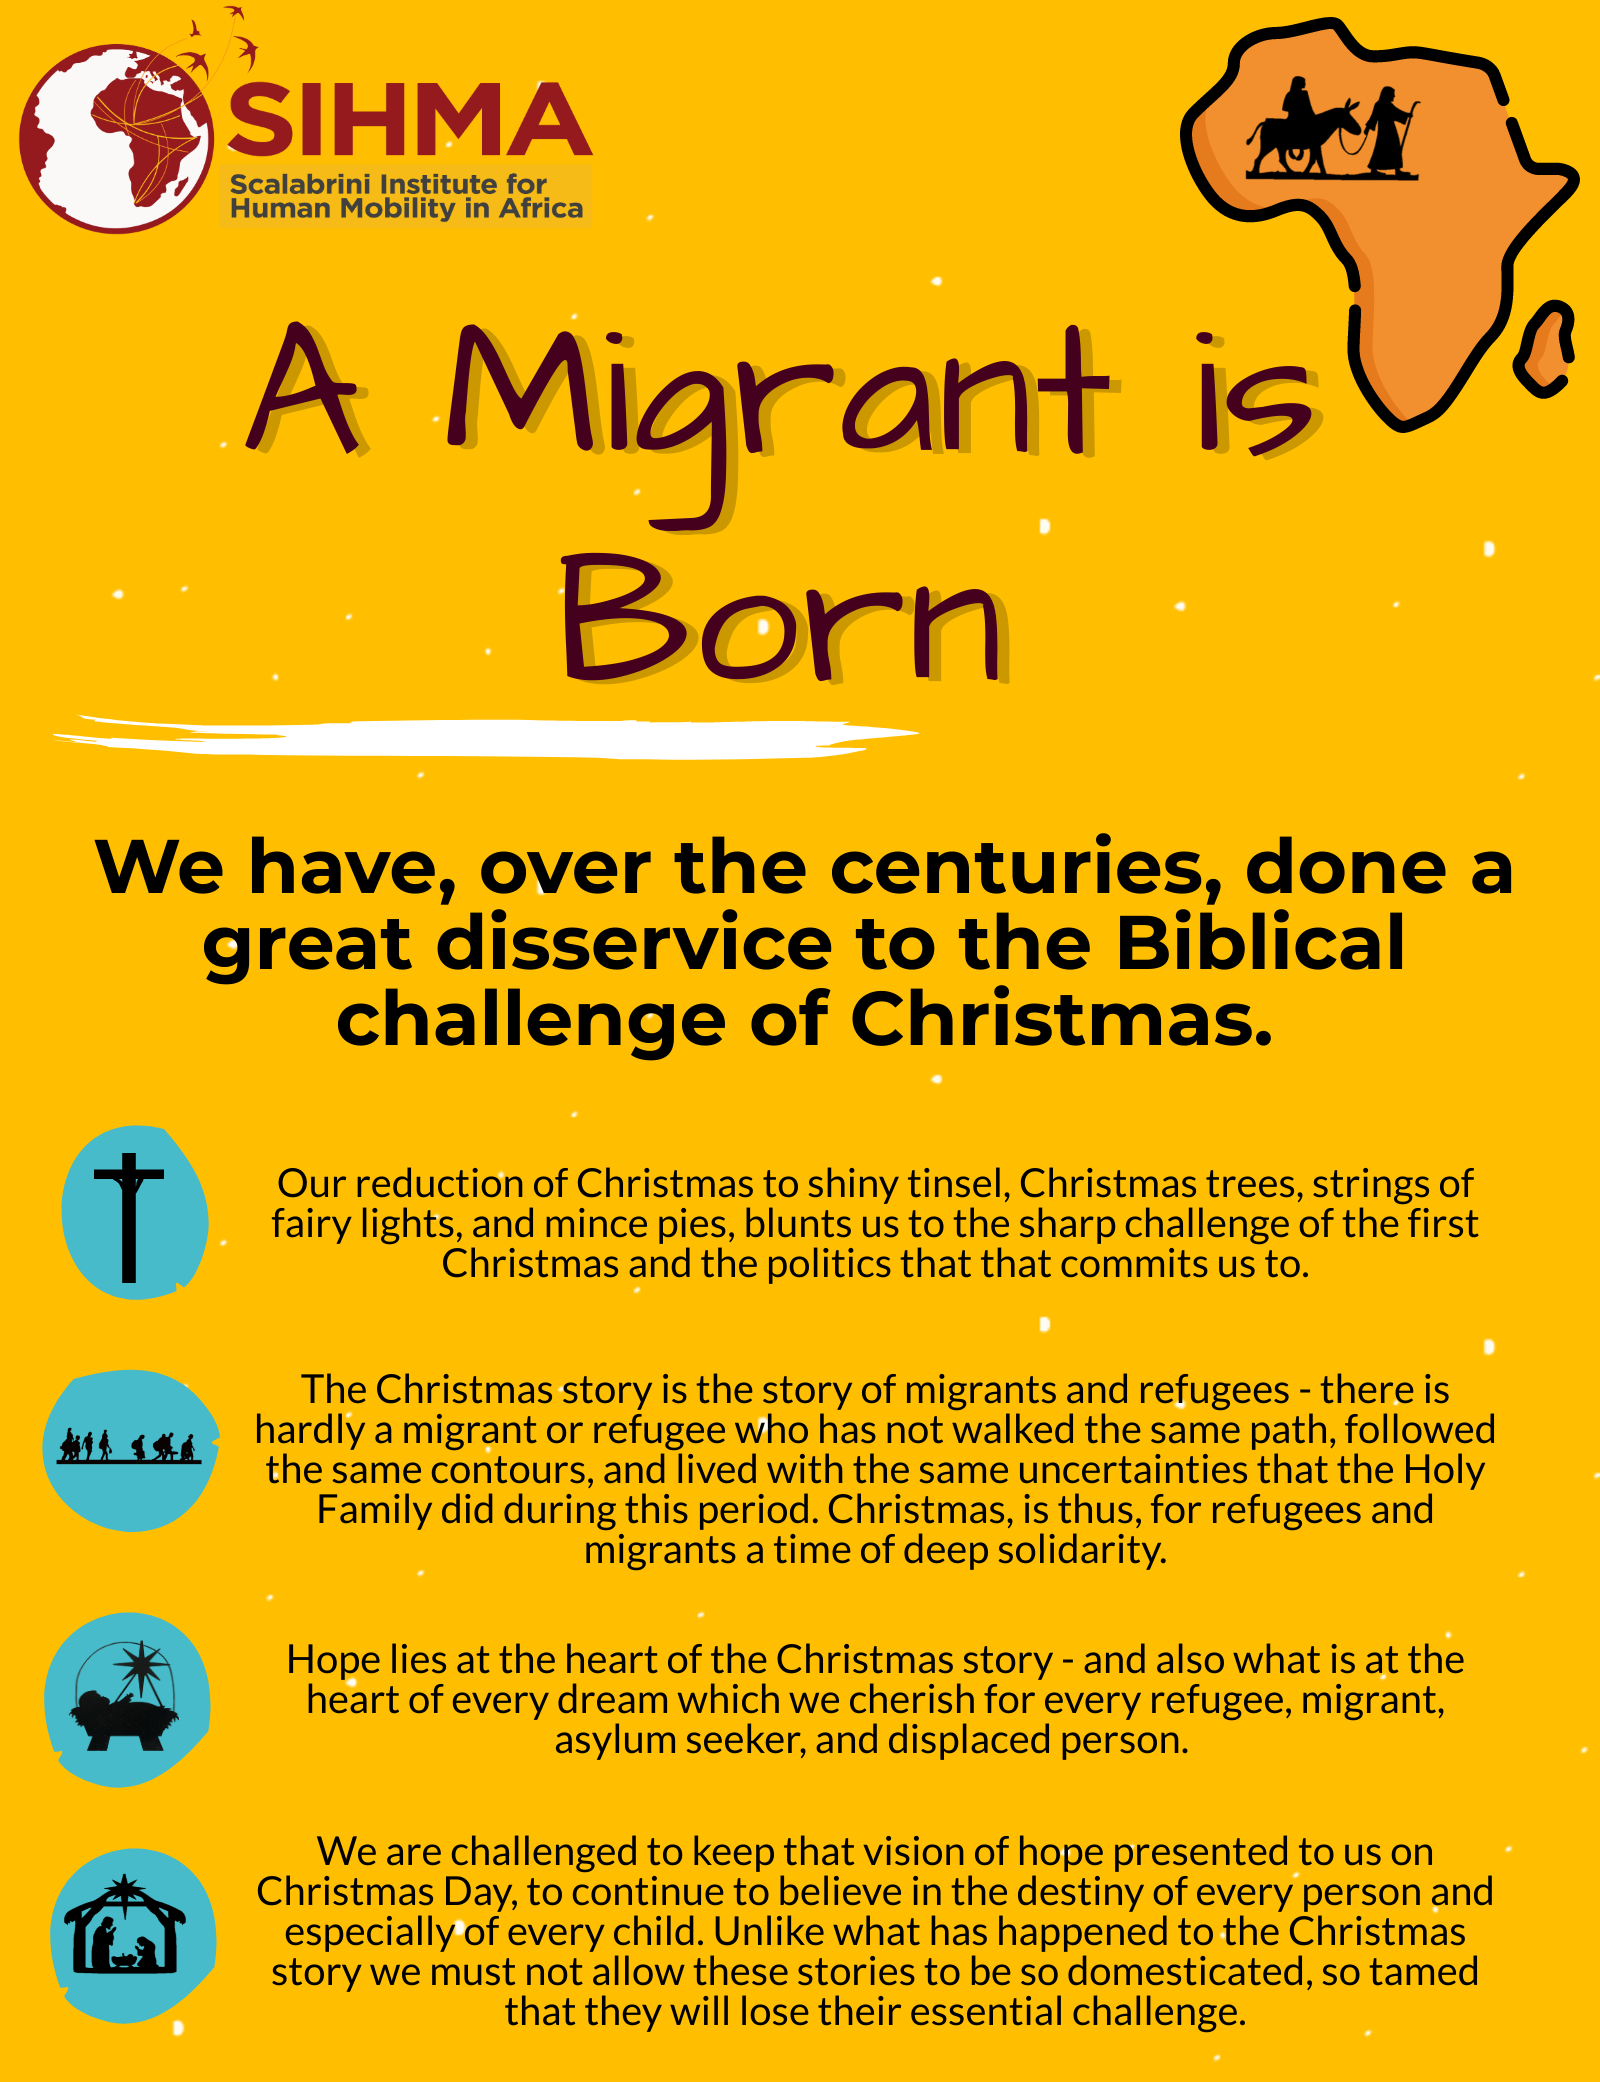 https://sihma.org.za/photos/shares/A Migrant is Born.png